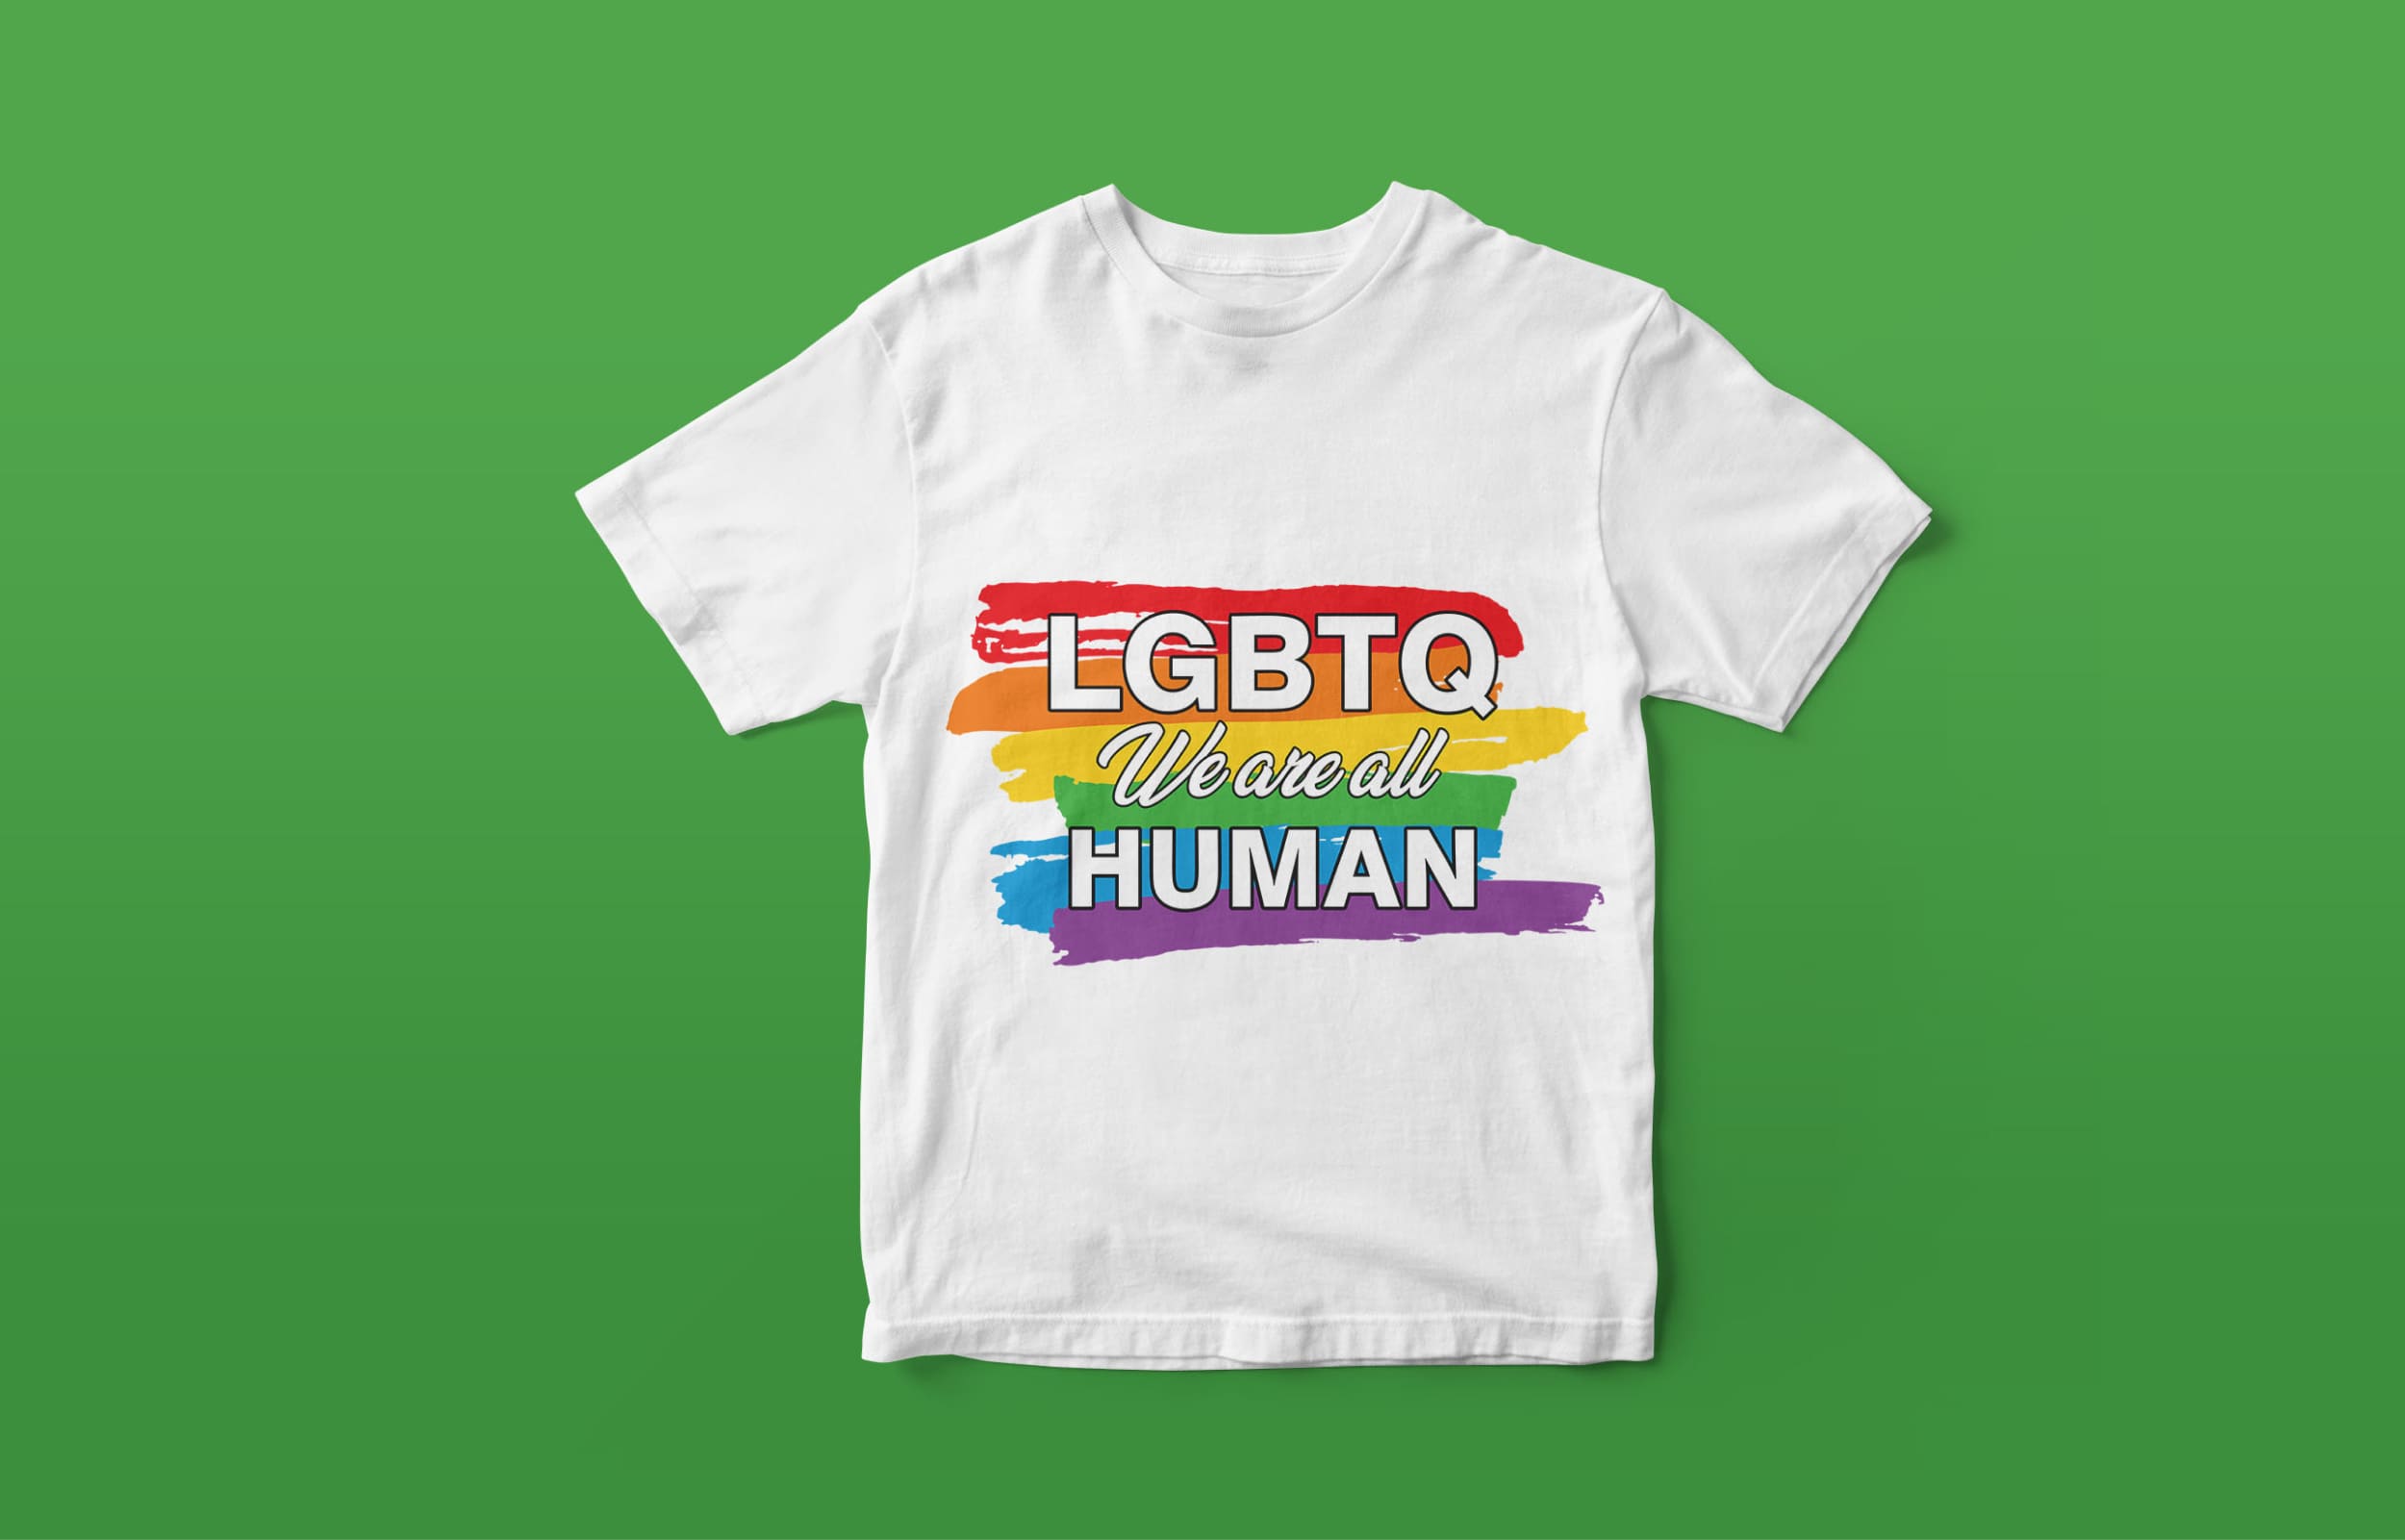 A white T-shirt with a white lettering "LGBTQ we are all human" against the background of the LGBT flag, on a green background.